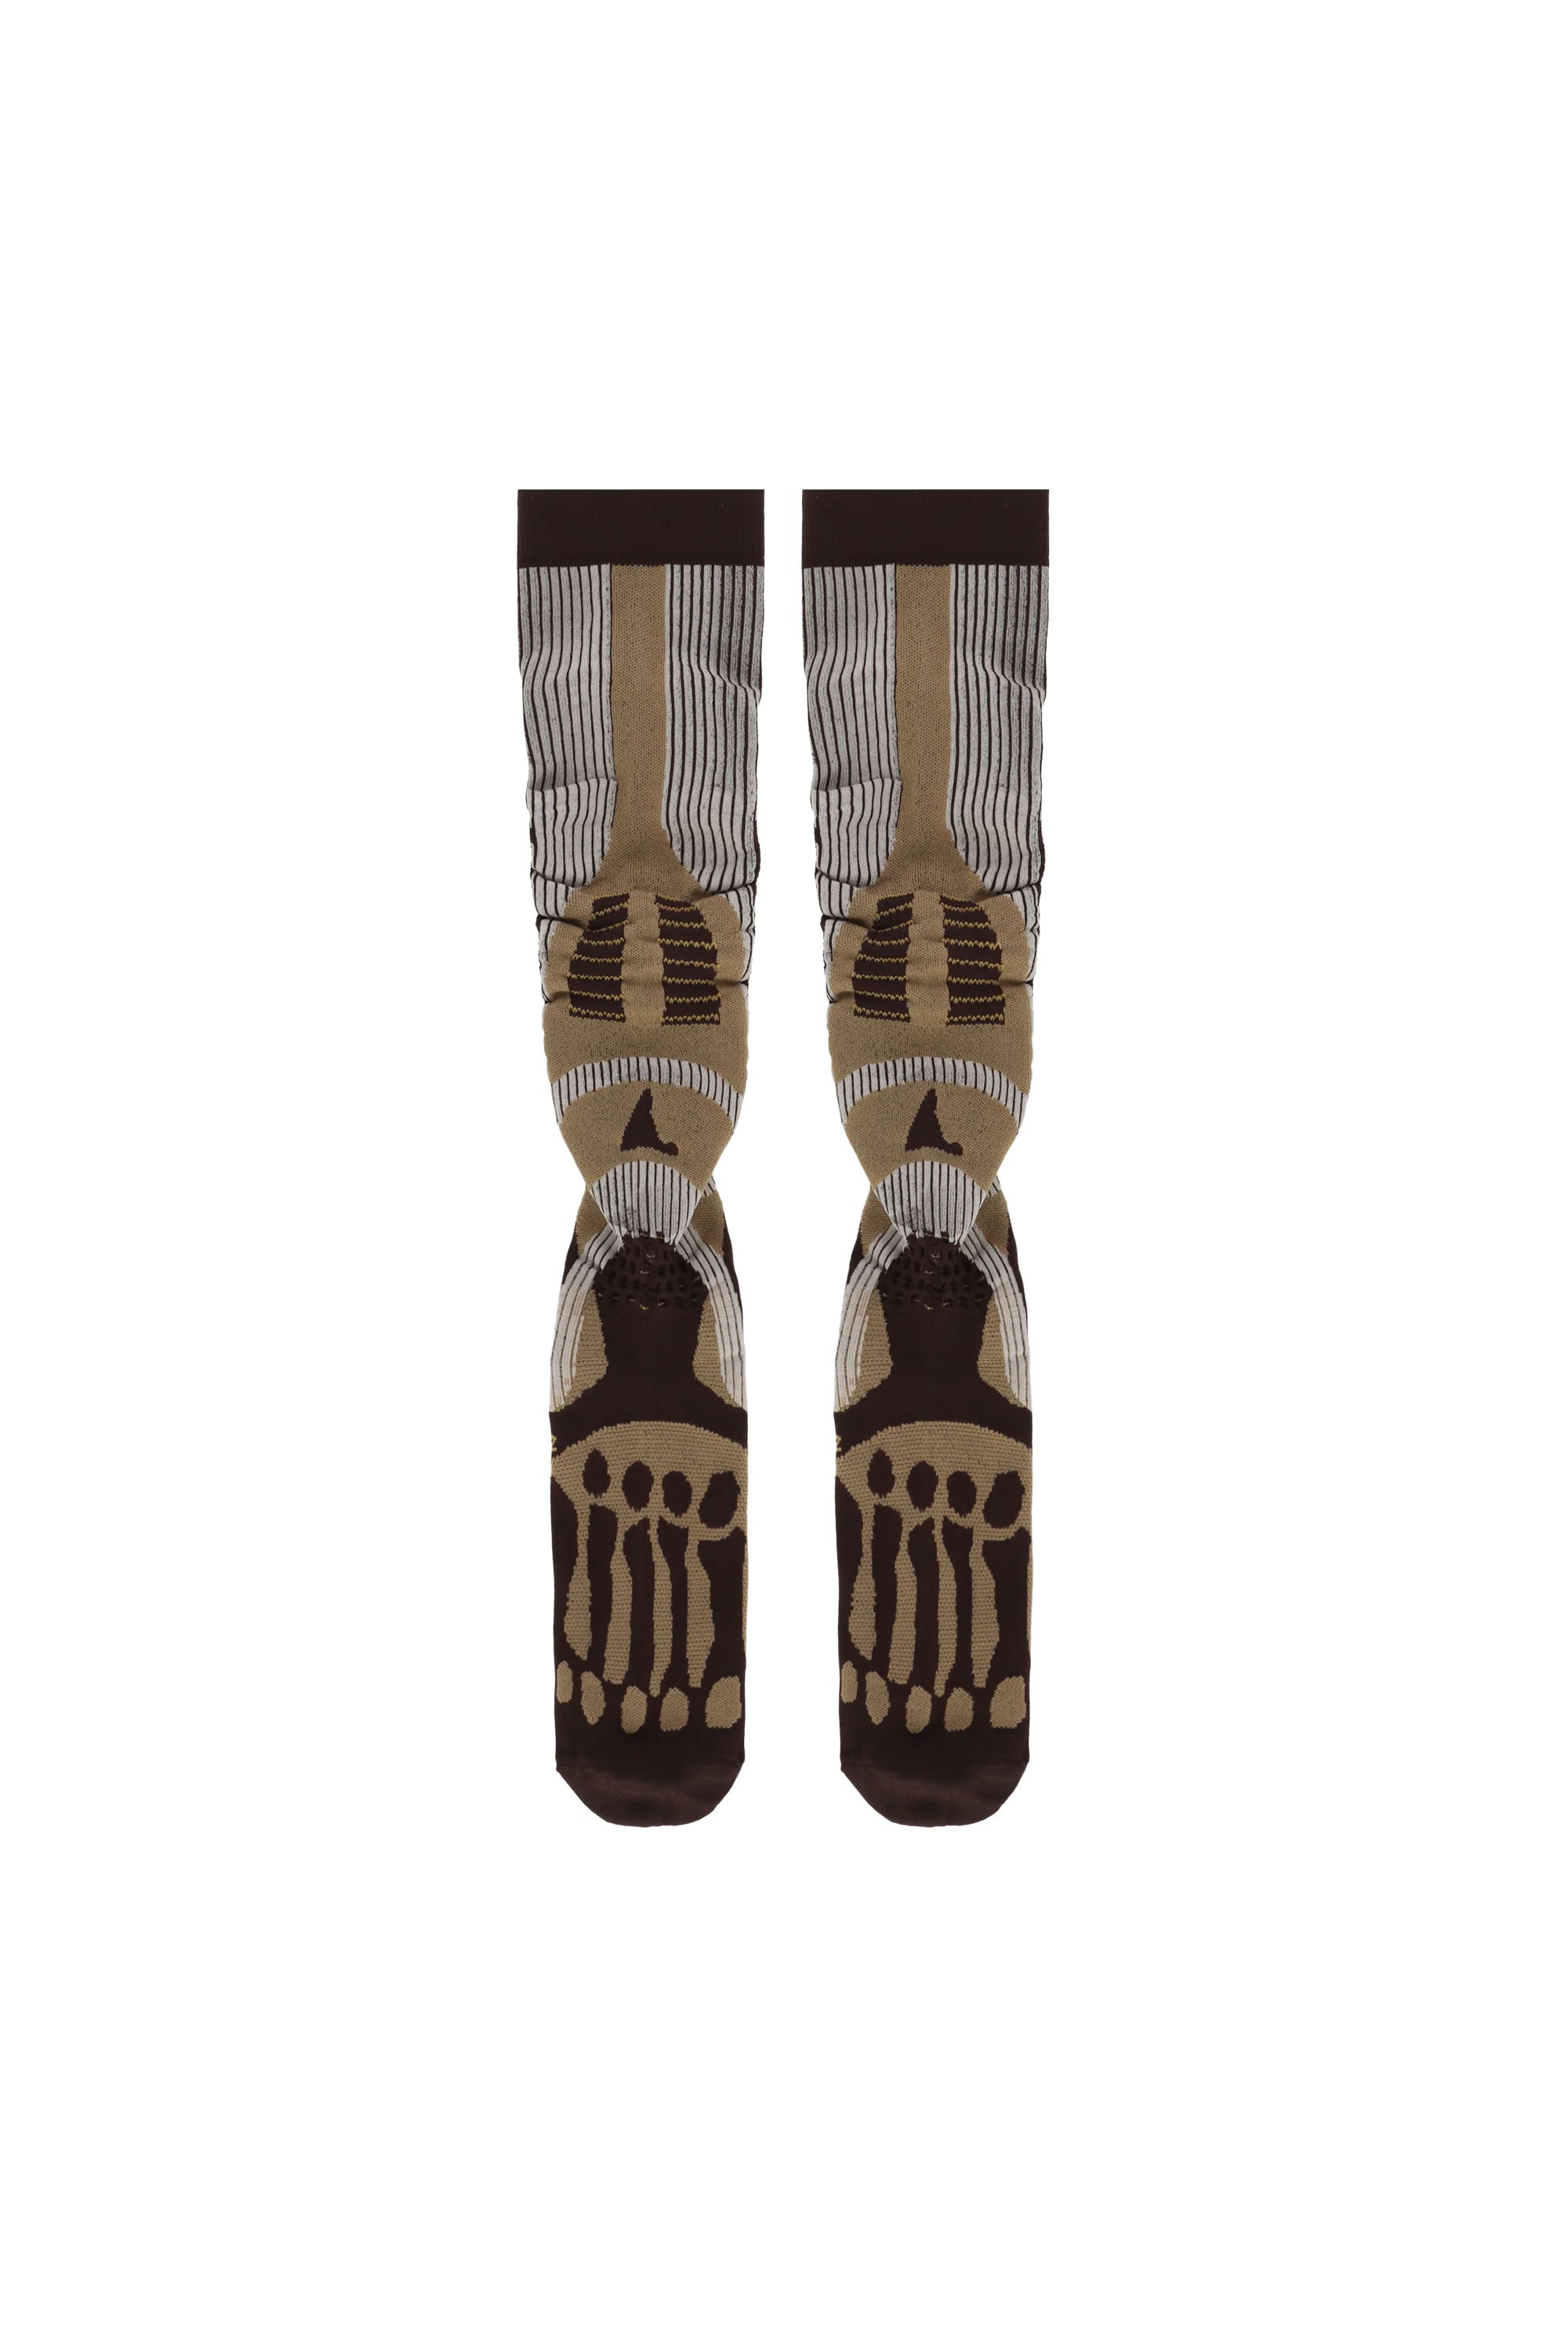 The ROA - BONES LONG SOCKS BROWN available online with global shipping, and in PAM Stores Melbourne and Sydney.